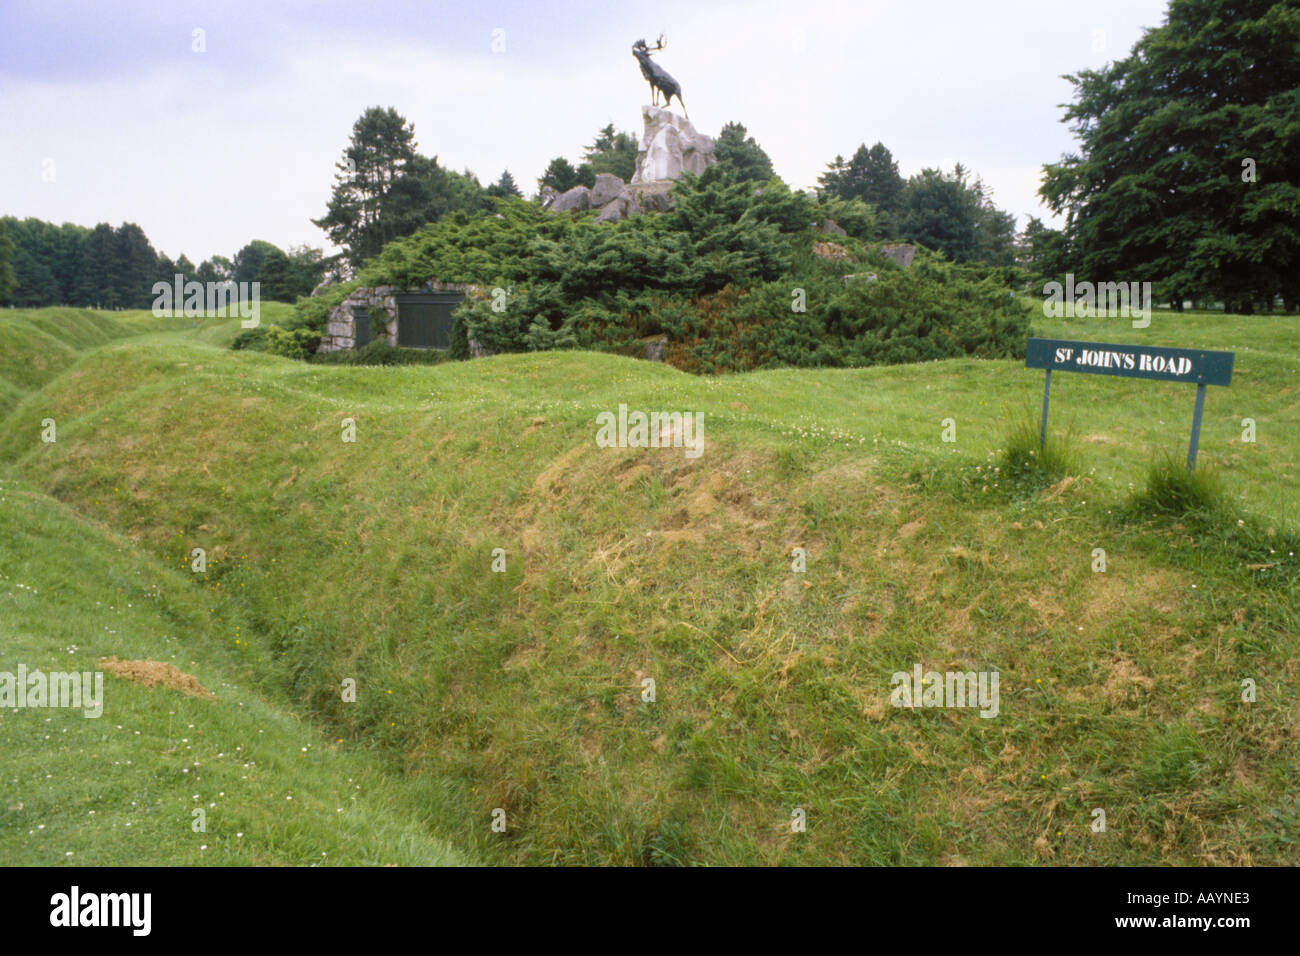 First World War Battle of the Somme trenches at Beaumont Hamel Newfoundland Battlefield Memorial Park JMH0788 Stock Photo